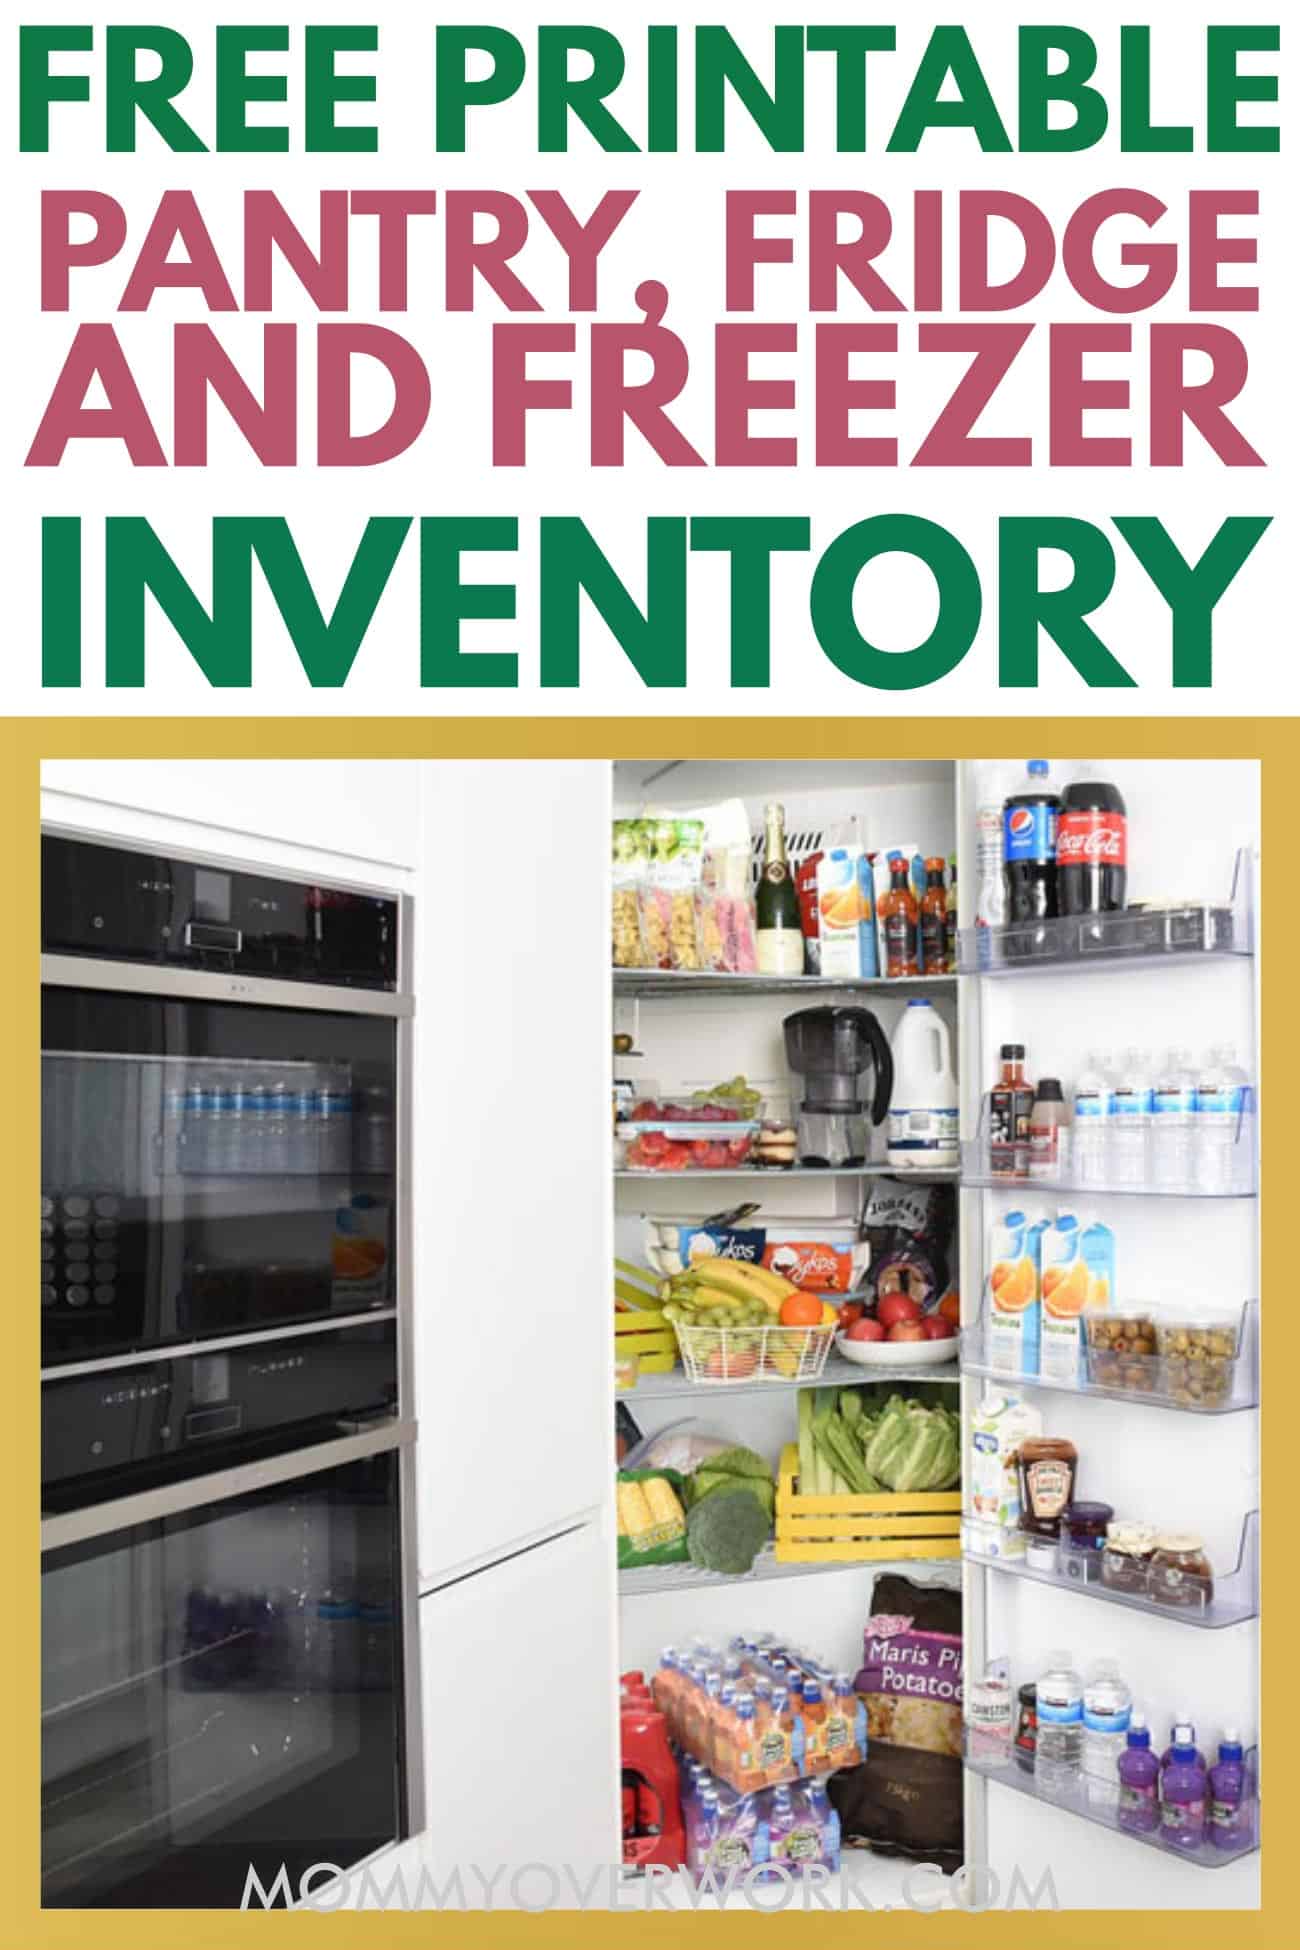 The RIGHT Way to Take Freezer, Fridge, Pantry Inventory [FREE Template]